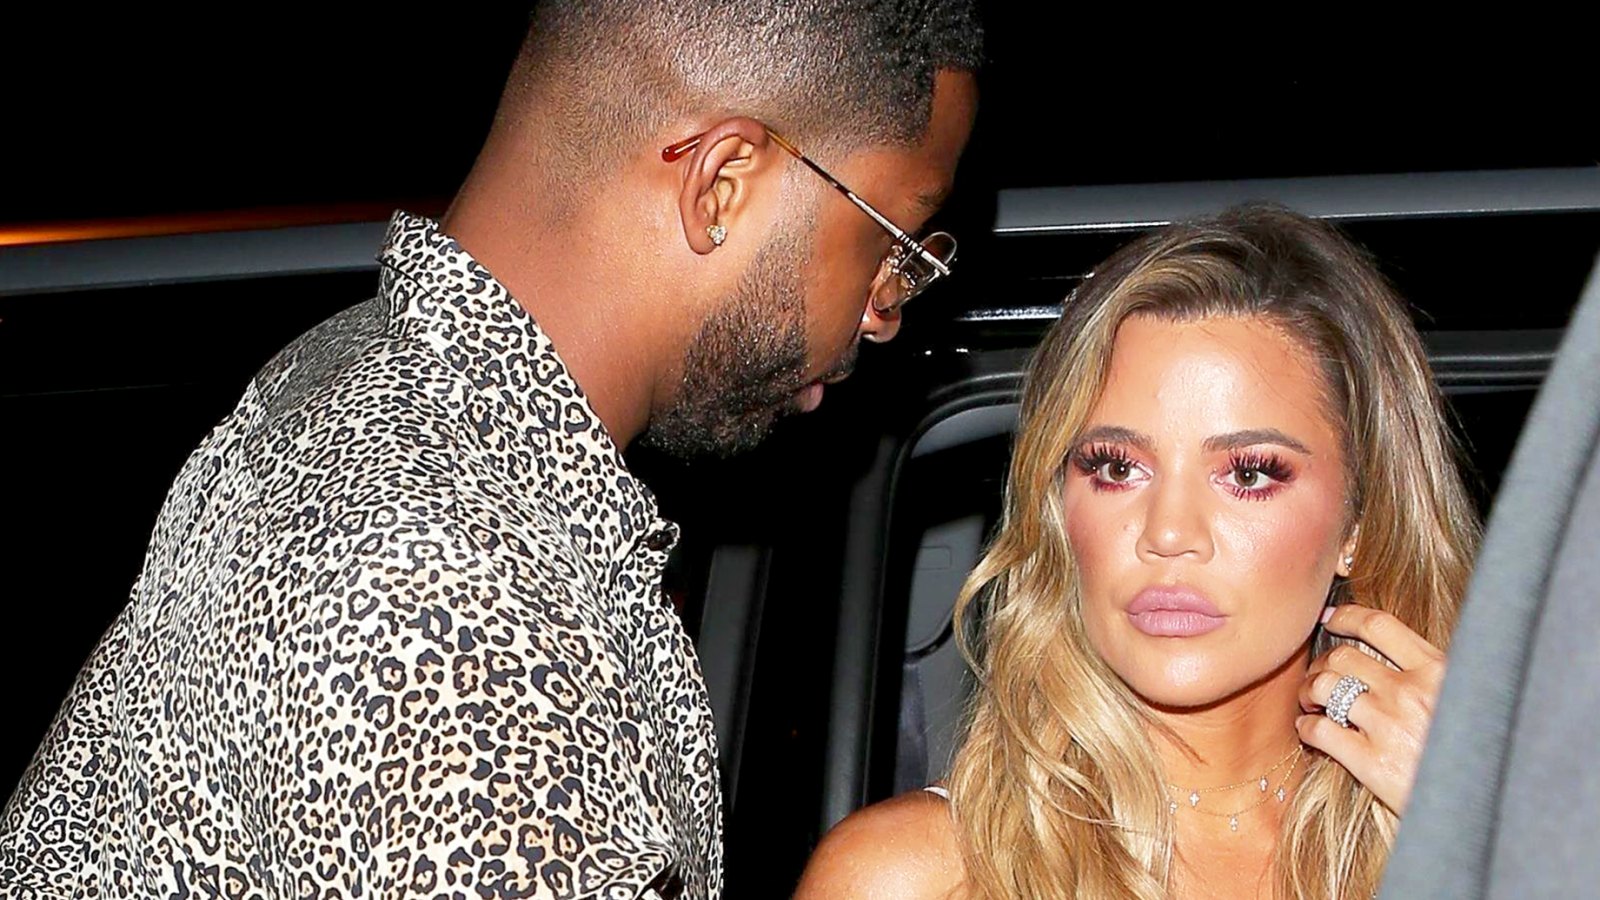 Khloe Kardashian and Tristan Thompson step out to Blind Dragon on June 25, 2017.